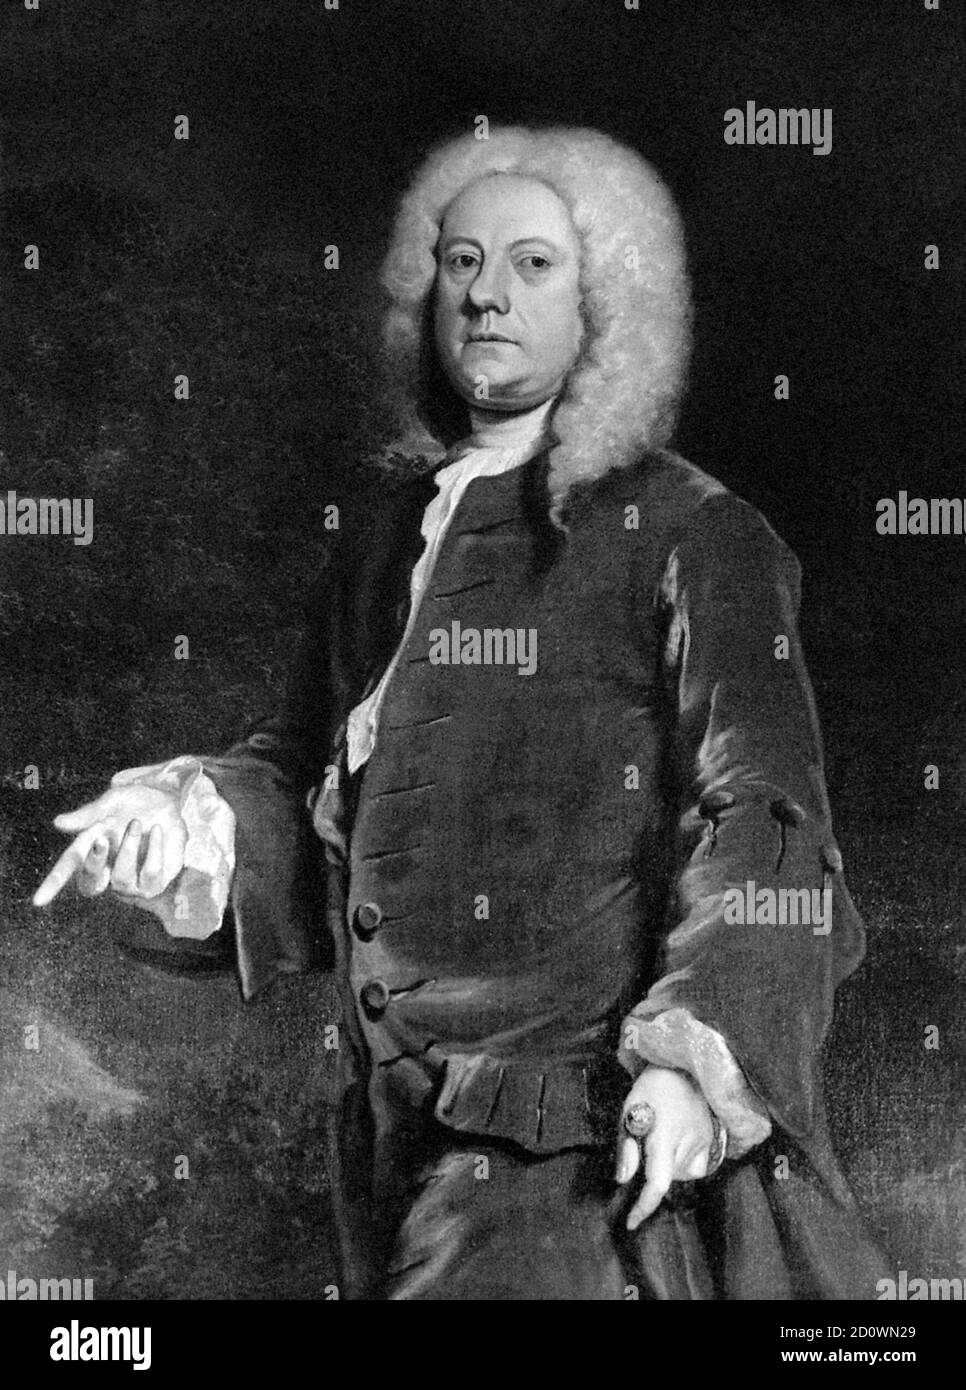 Jethro Tull. Portrait of the 18th century English agricultural pioneer, Jethro Tull (1674-1741) Stock Photo